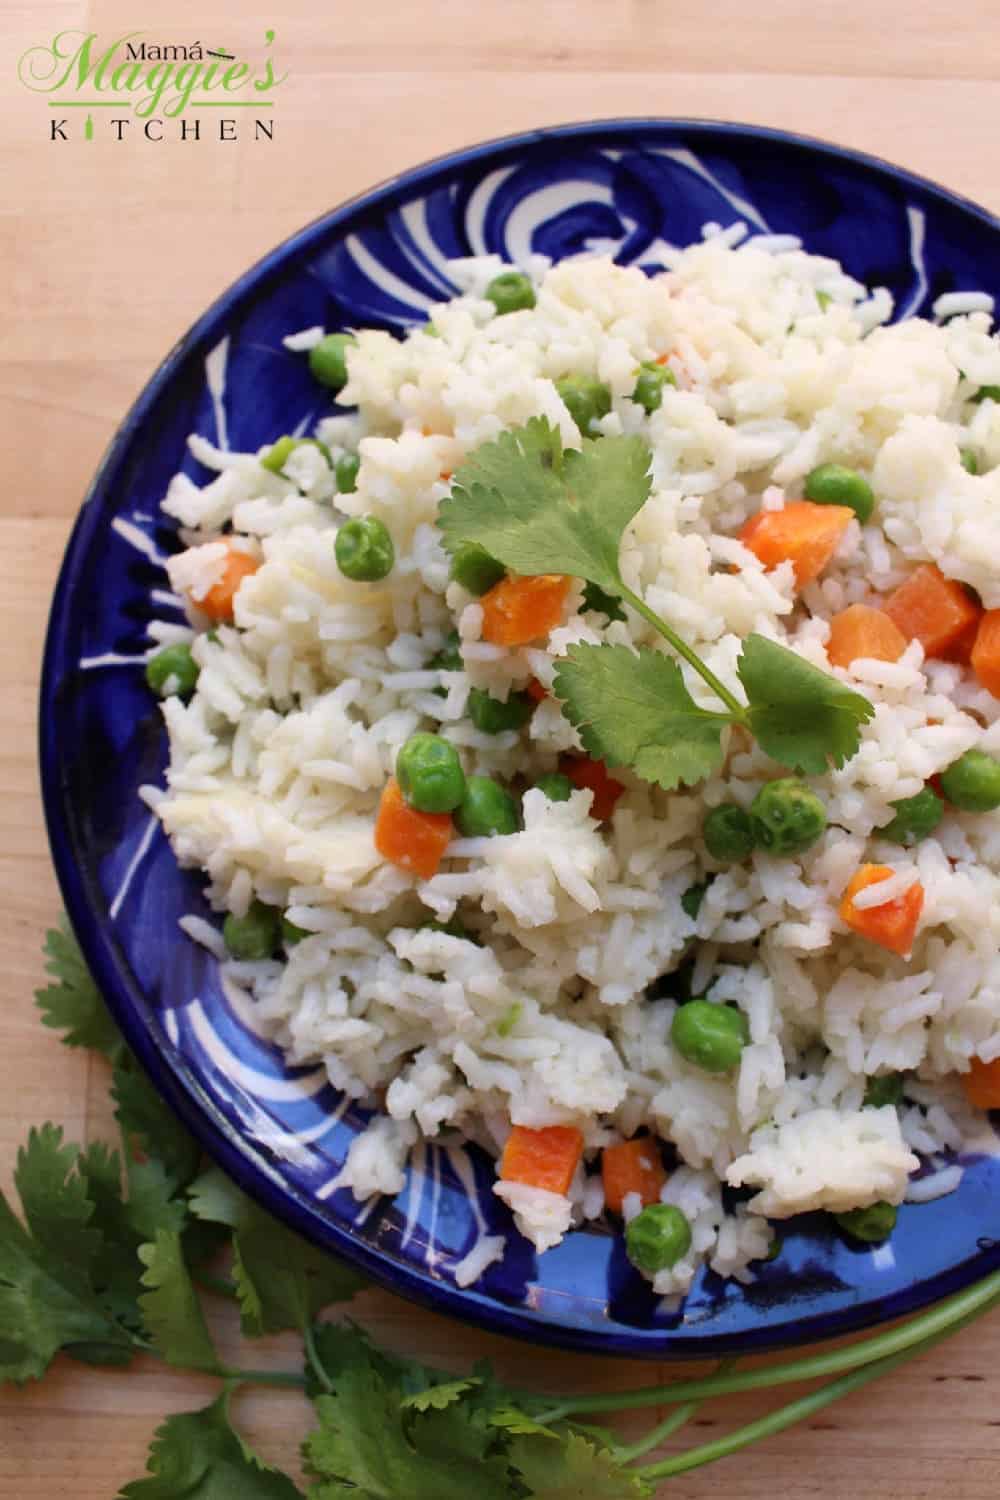 Arroz Blanco (or Mexican White Rice) on a decorative blue plate surrounded and garnished with cilantro leaves.